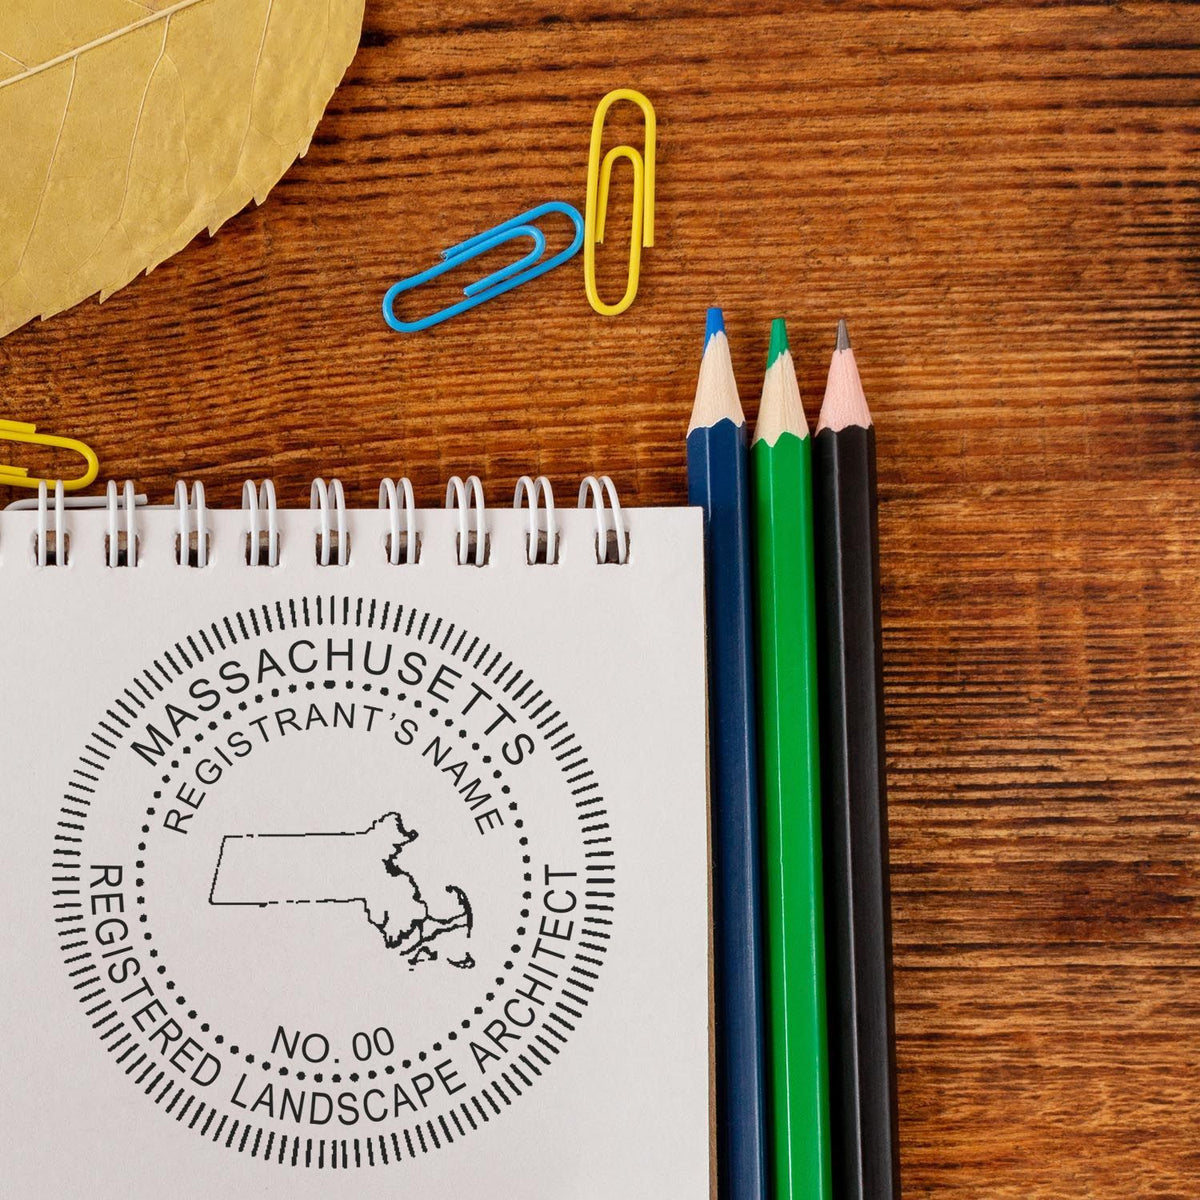 This paper is stamped with a sample imprint of the Slim Pre-Inked Massachusetts Landscape Architect Seal Stamp, signifying its quality and reliability.